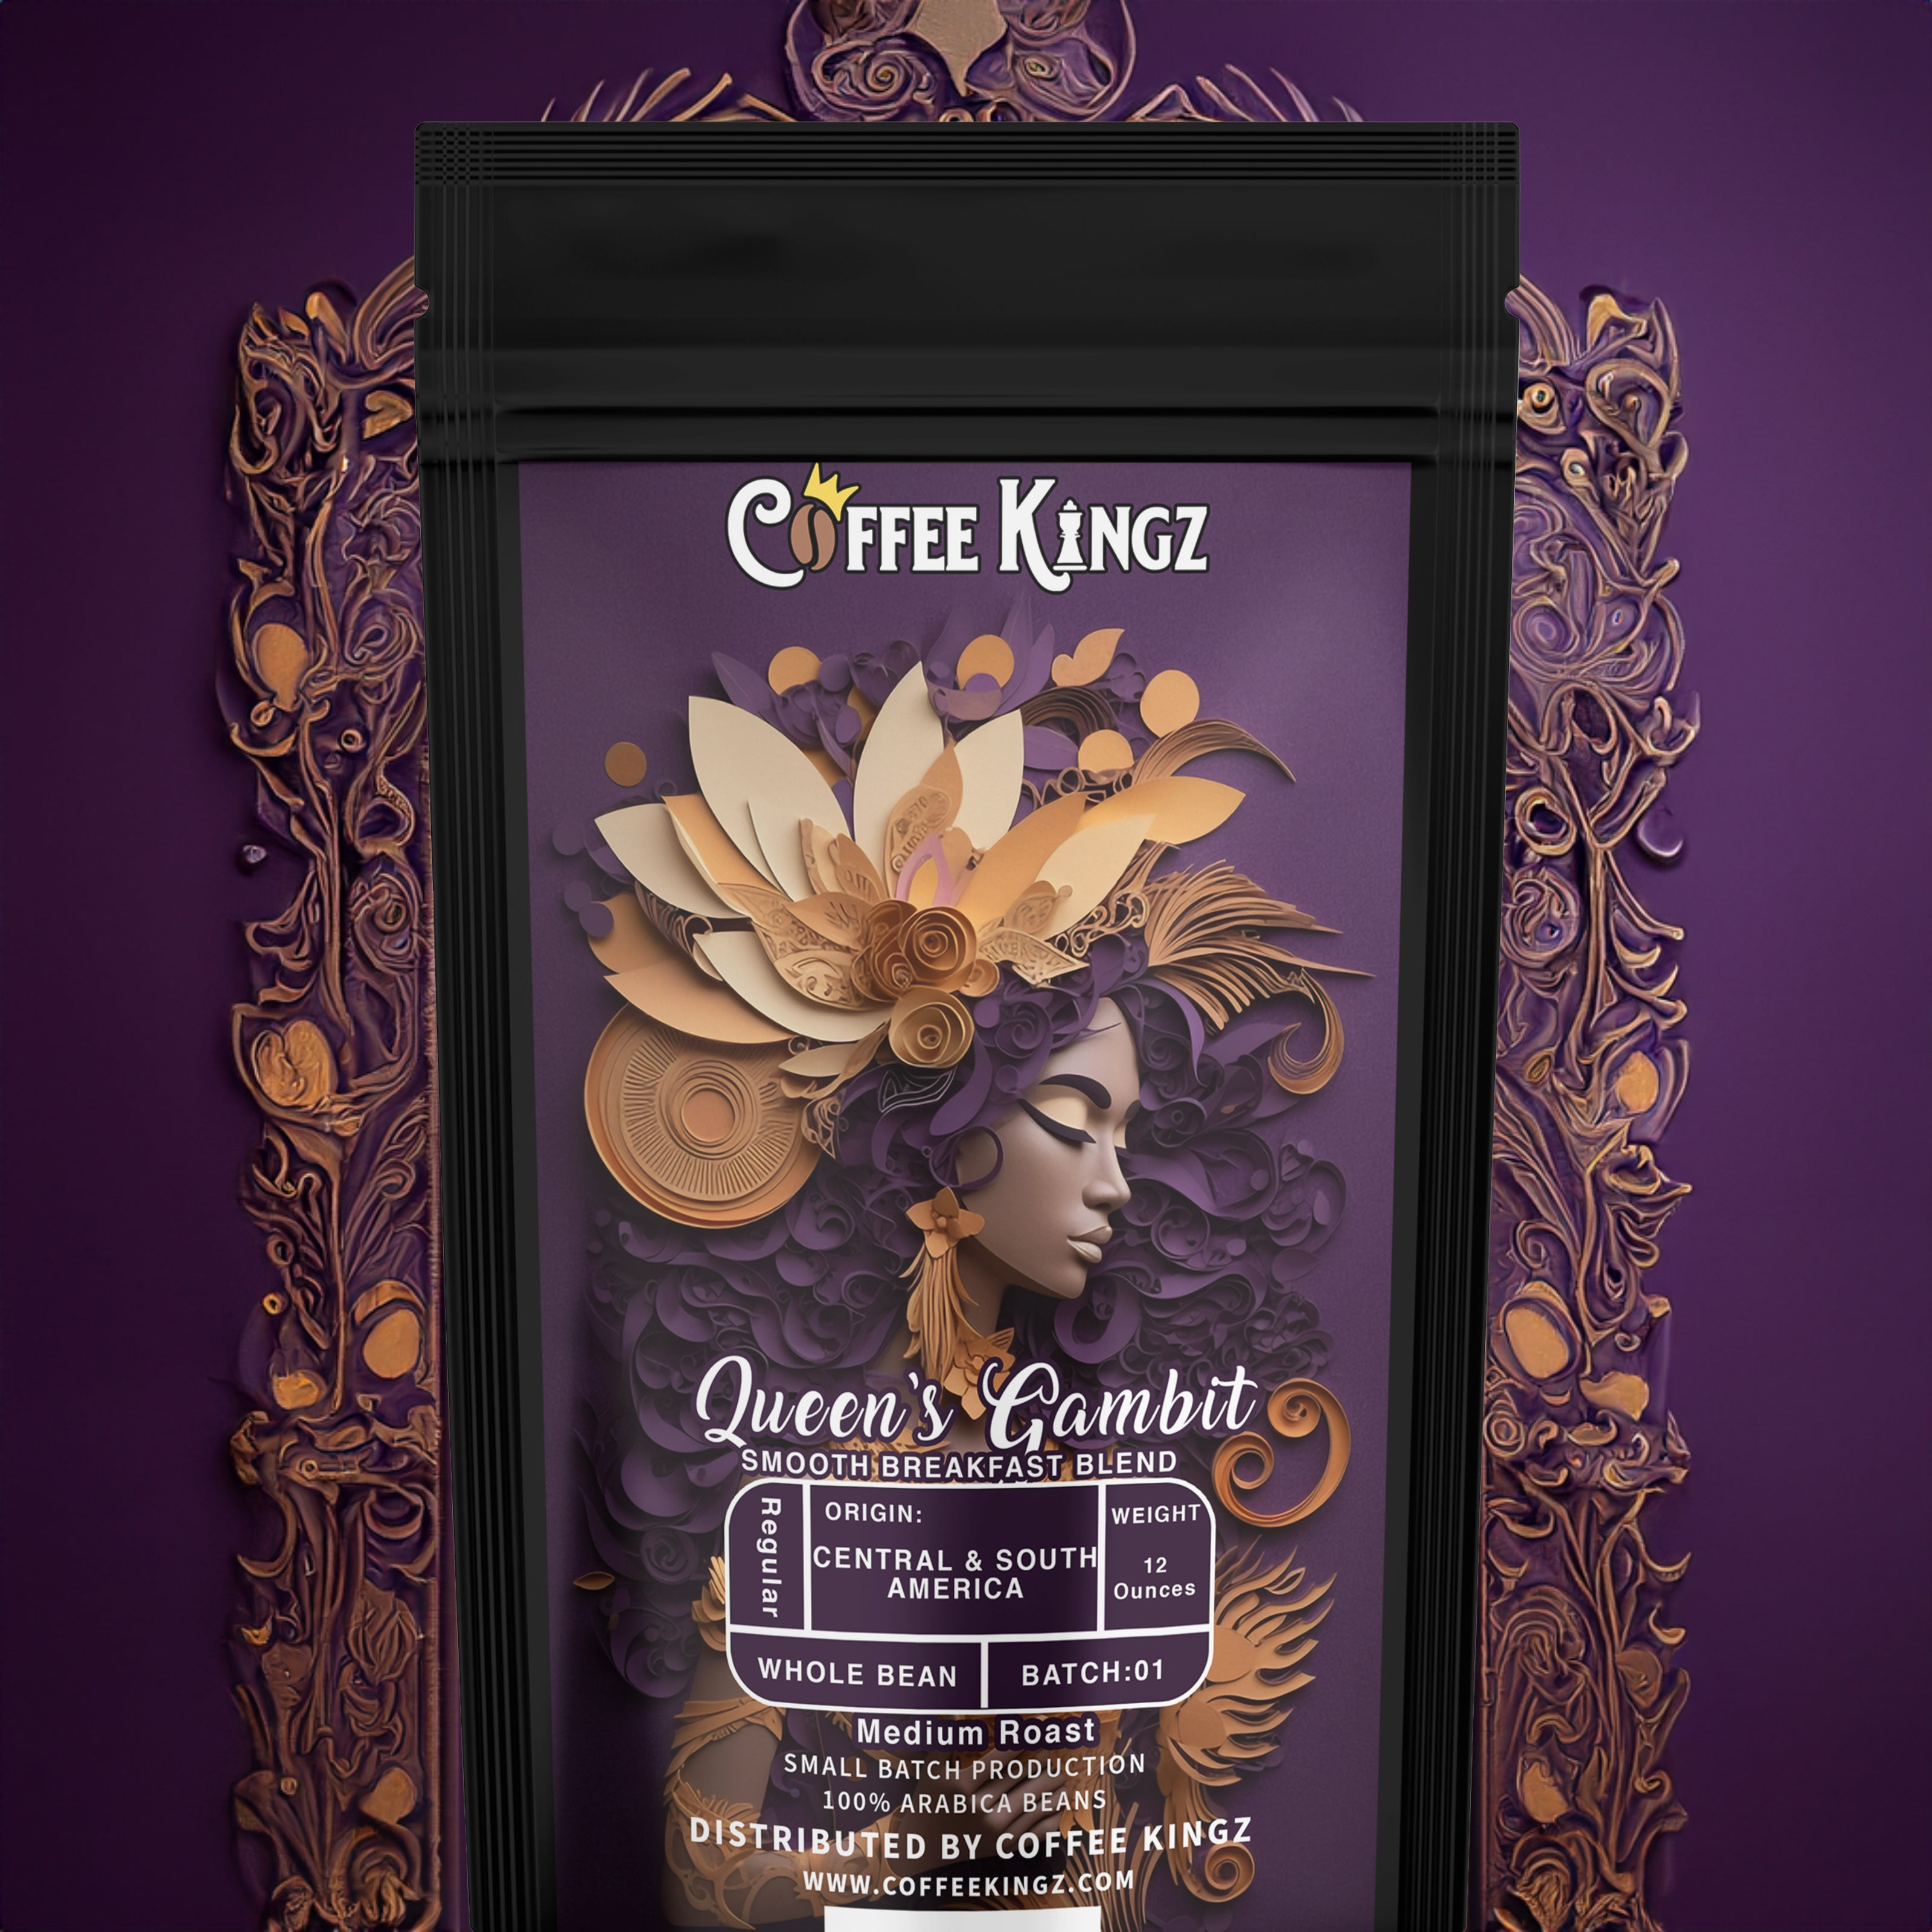  Coffee kingz presents queen's gambit, a smooth breakfast blend of whole bean coffee with artistic floral and chess-themed packaging design.